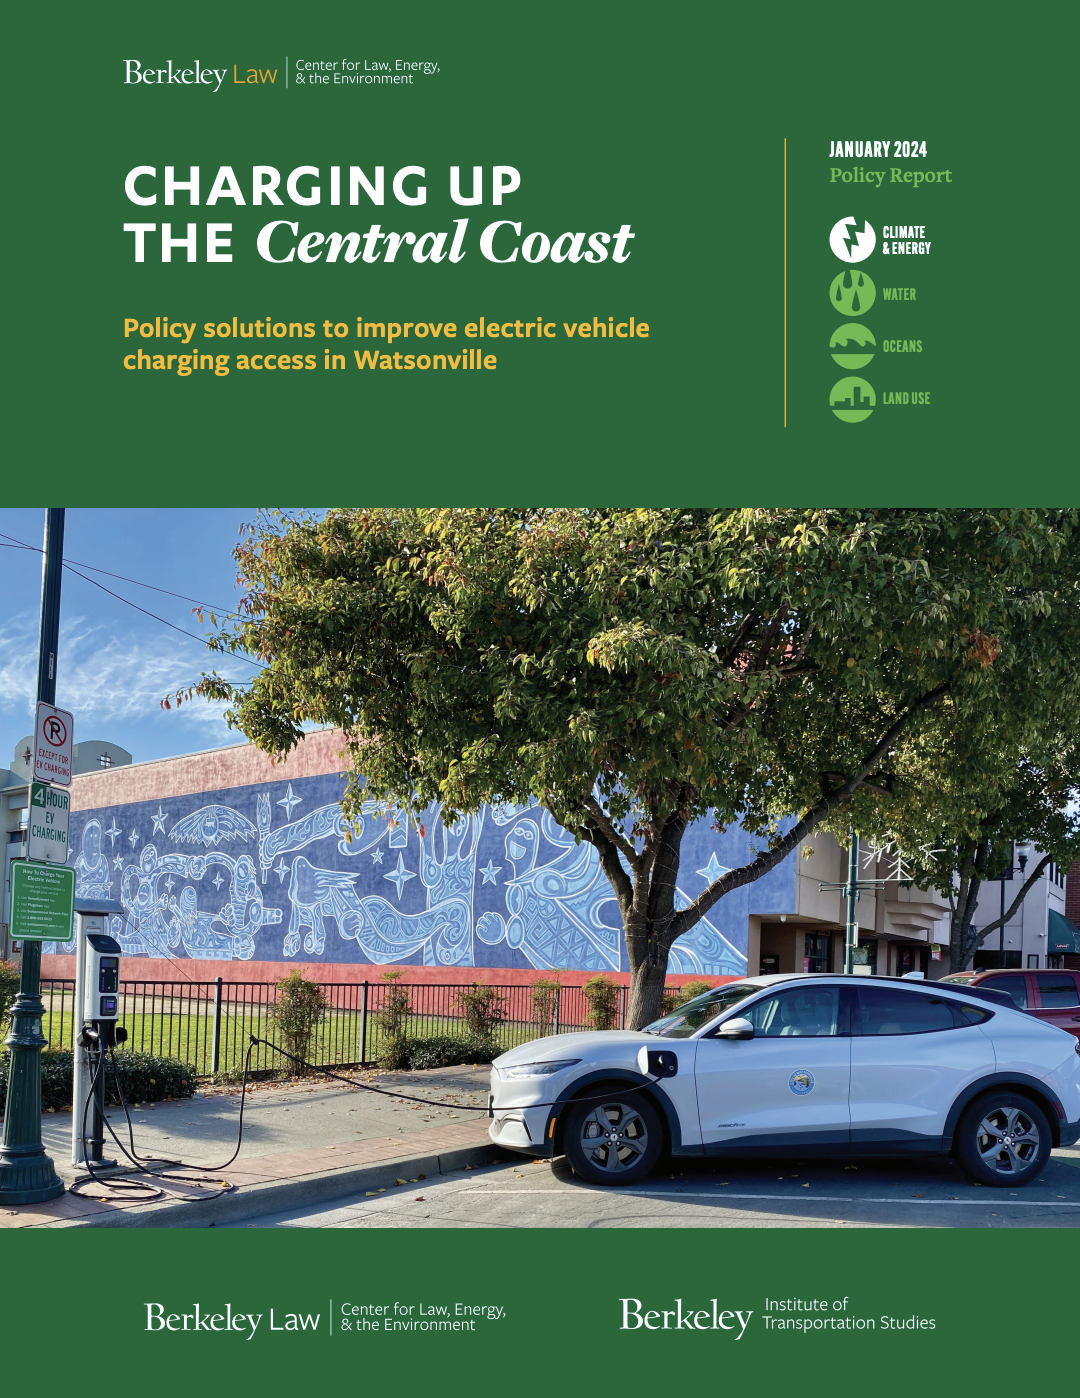 Charging up the Central Coast: Policy solutions to improve electric vehicle charging access in Watsonville cover image of an electric vehicle plugged in at a charging station